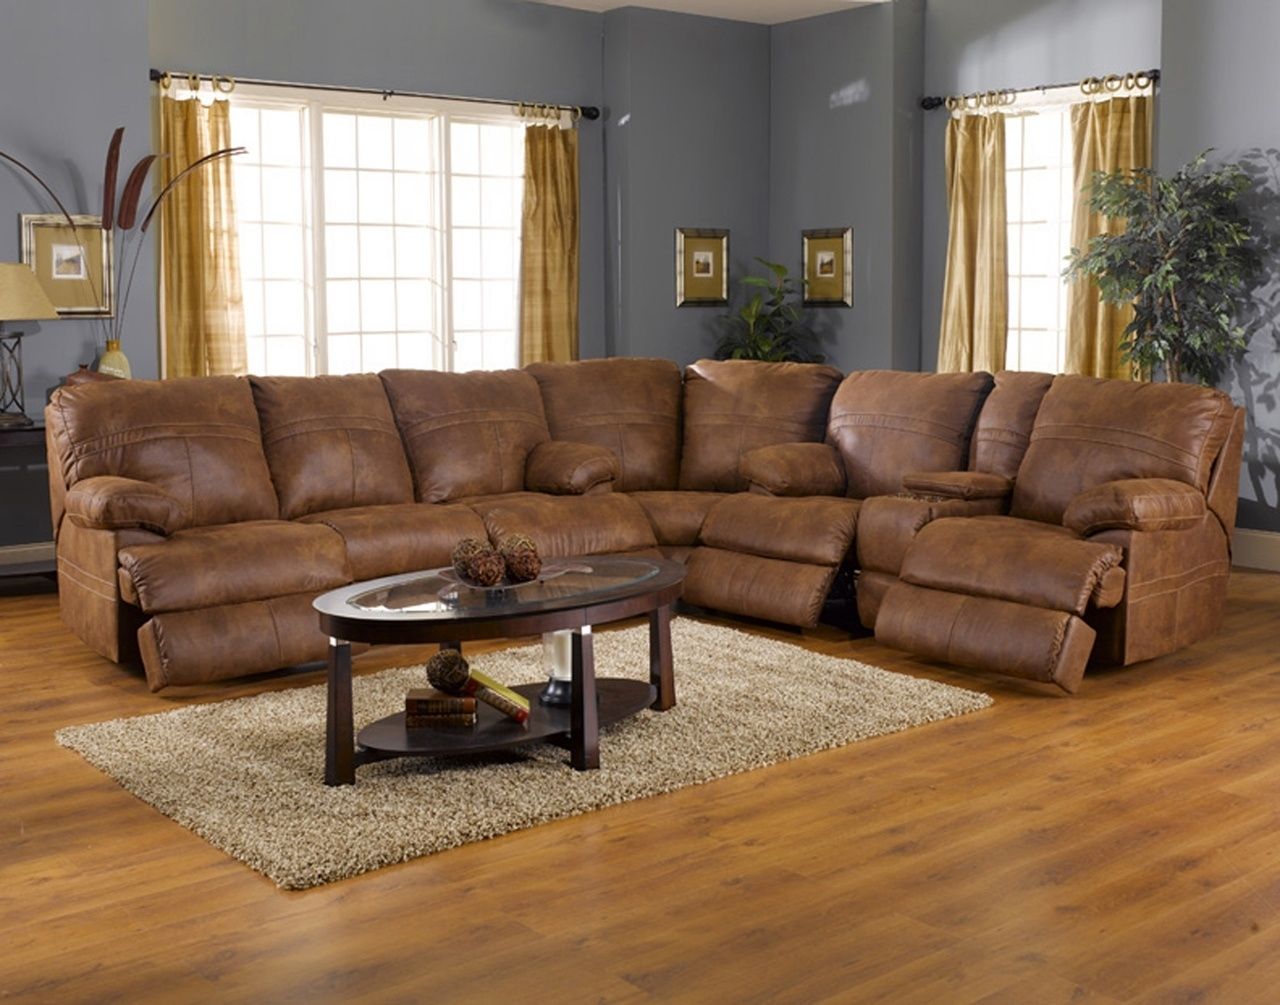 Sectional Sofa Design: Sectional Sofa Recliners Leather Sectional Within Leather Recliner Sectional Sofas (Photo 7 of 10)